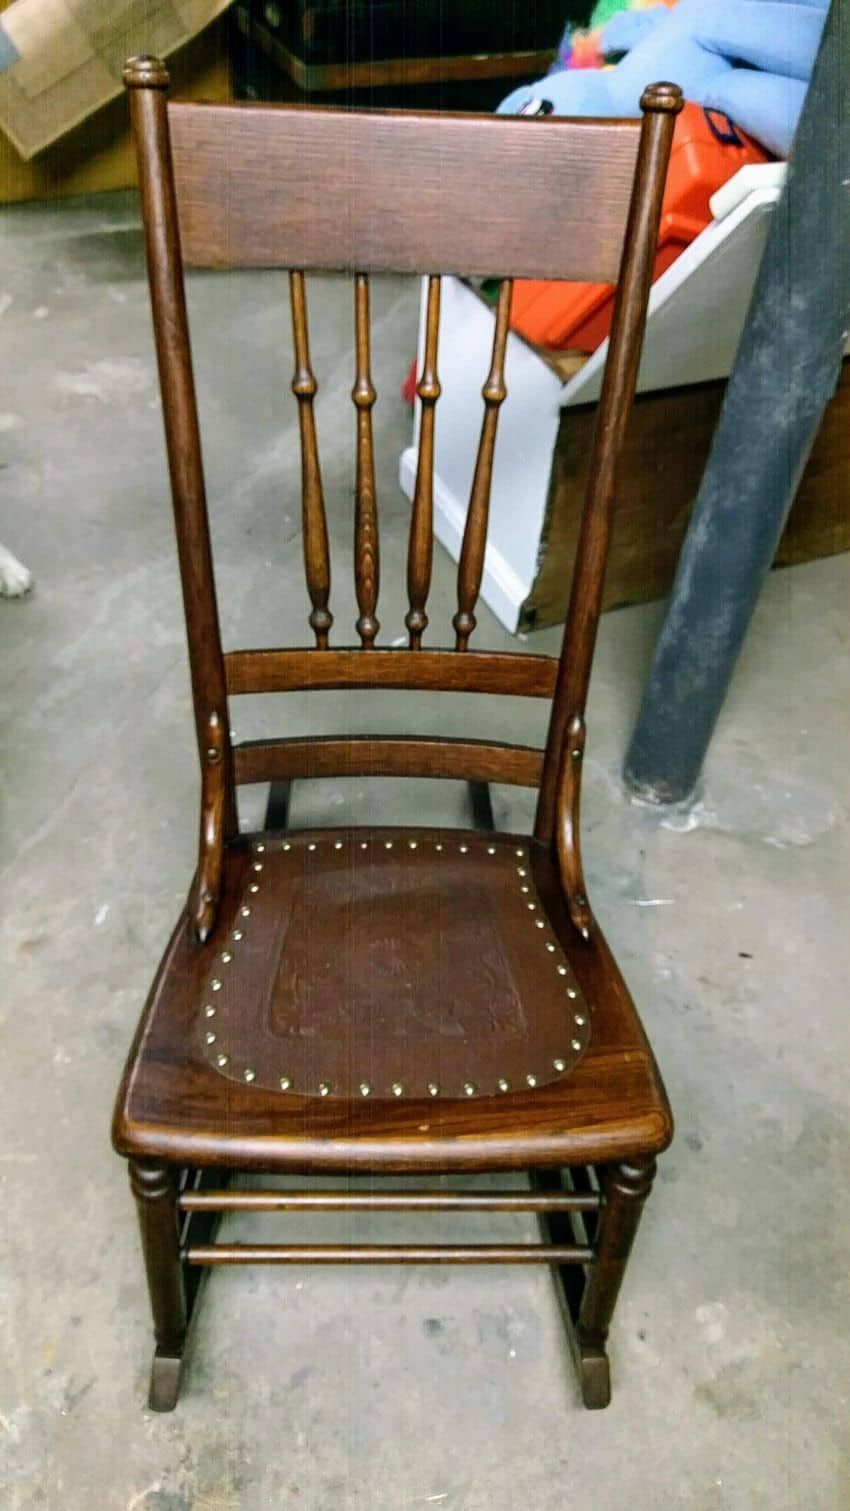 How to Replace a Leather Seat in an Antique Chair – Everyday Old House